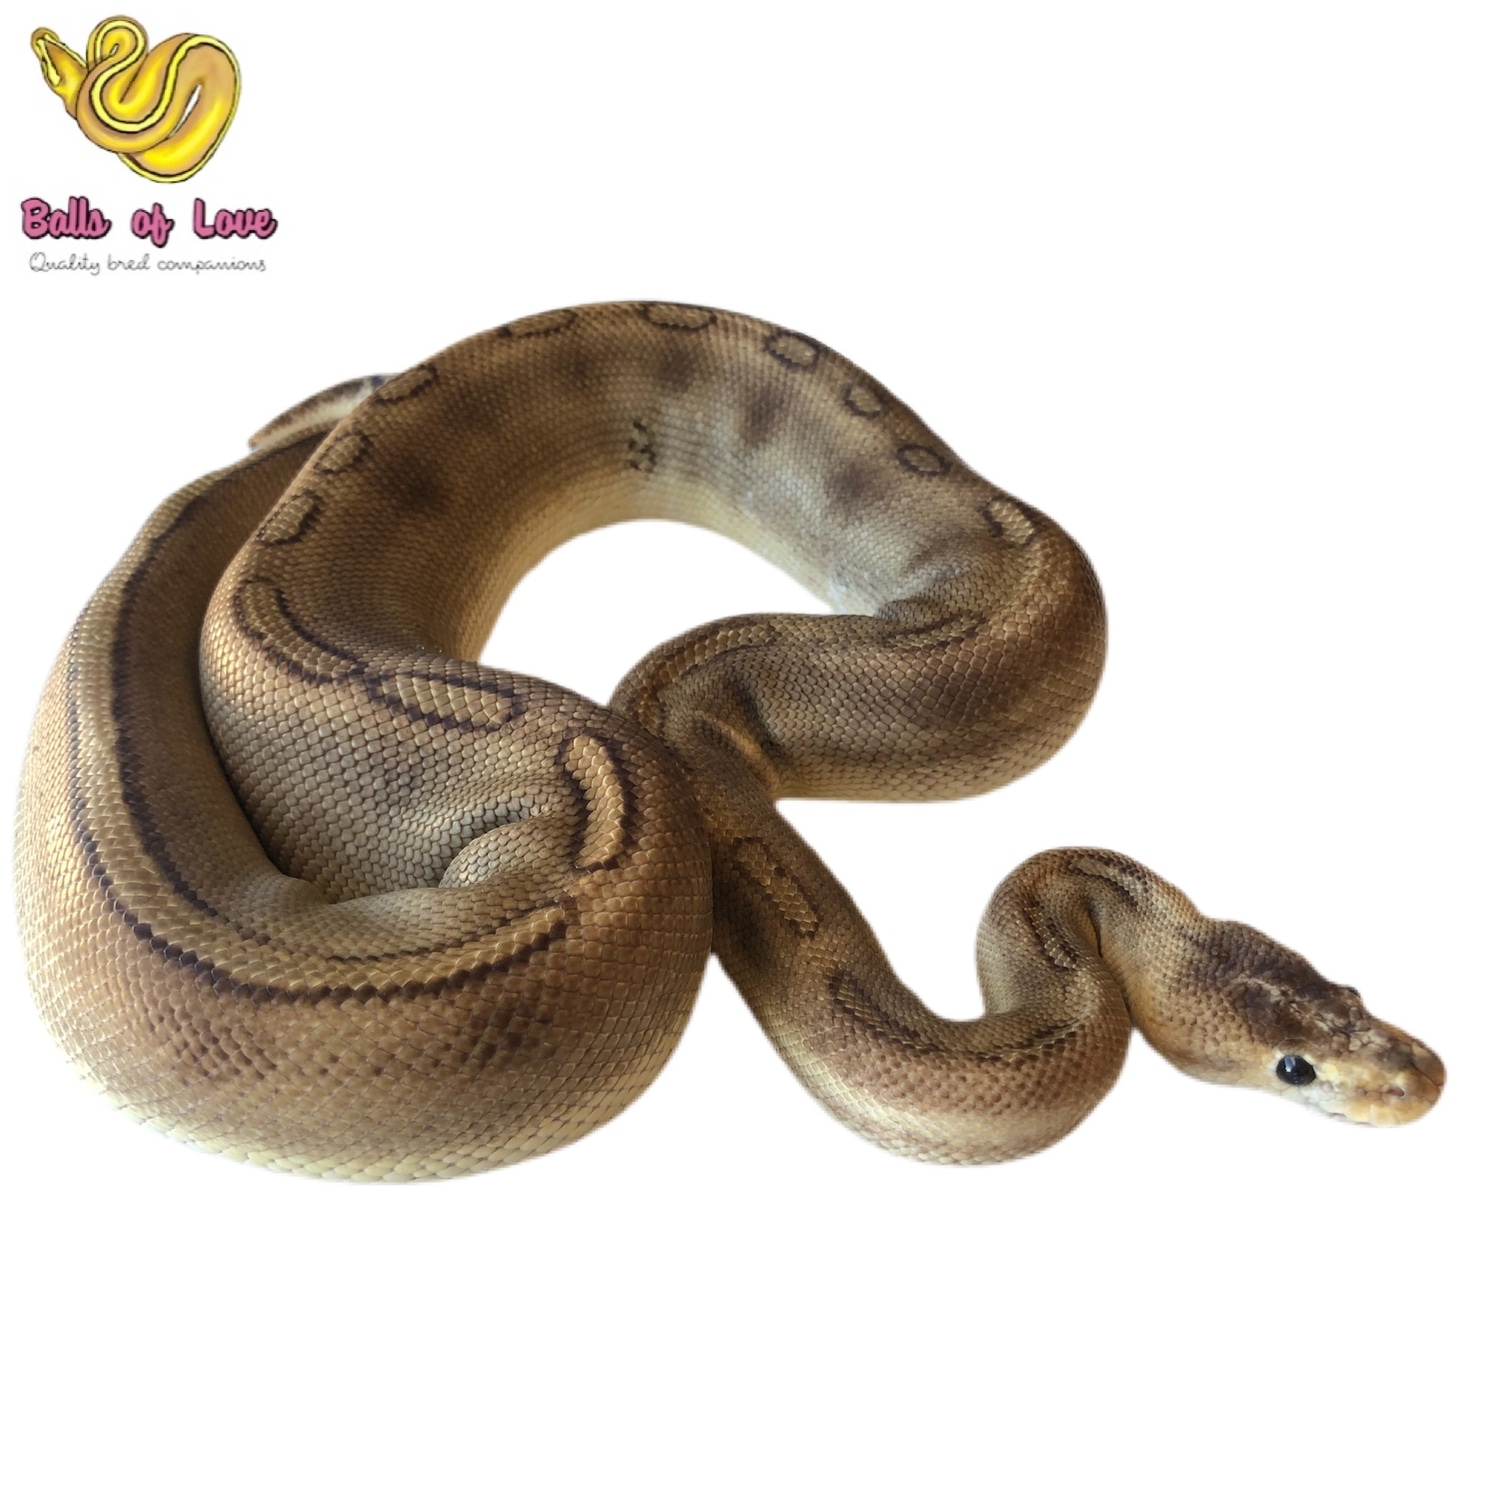 Champagne Ball Python by Balls of Love